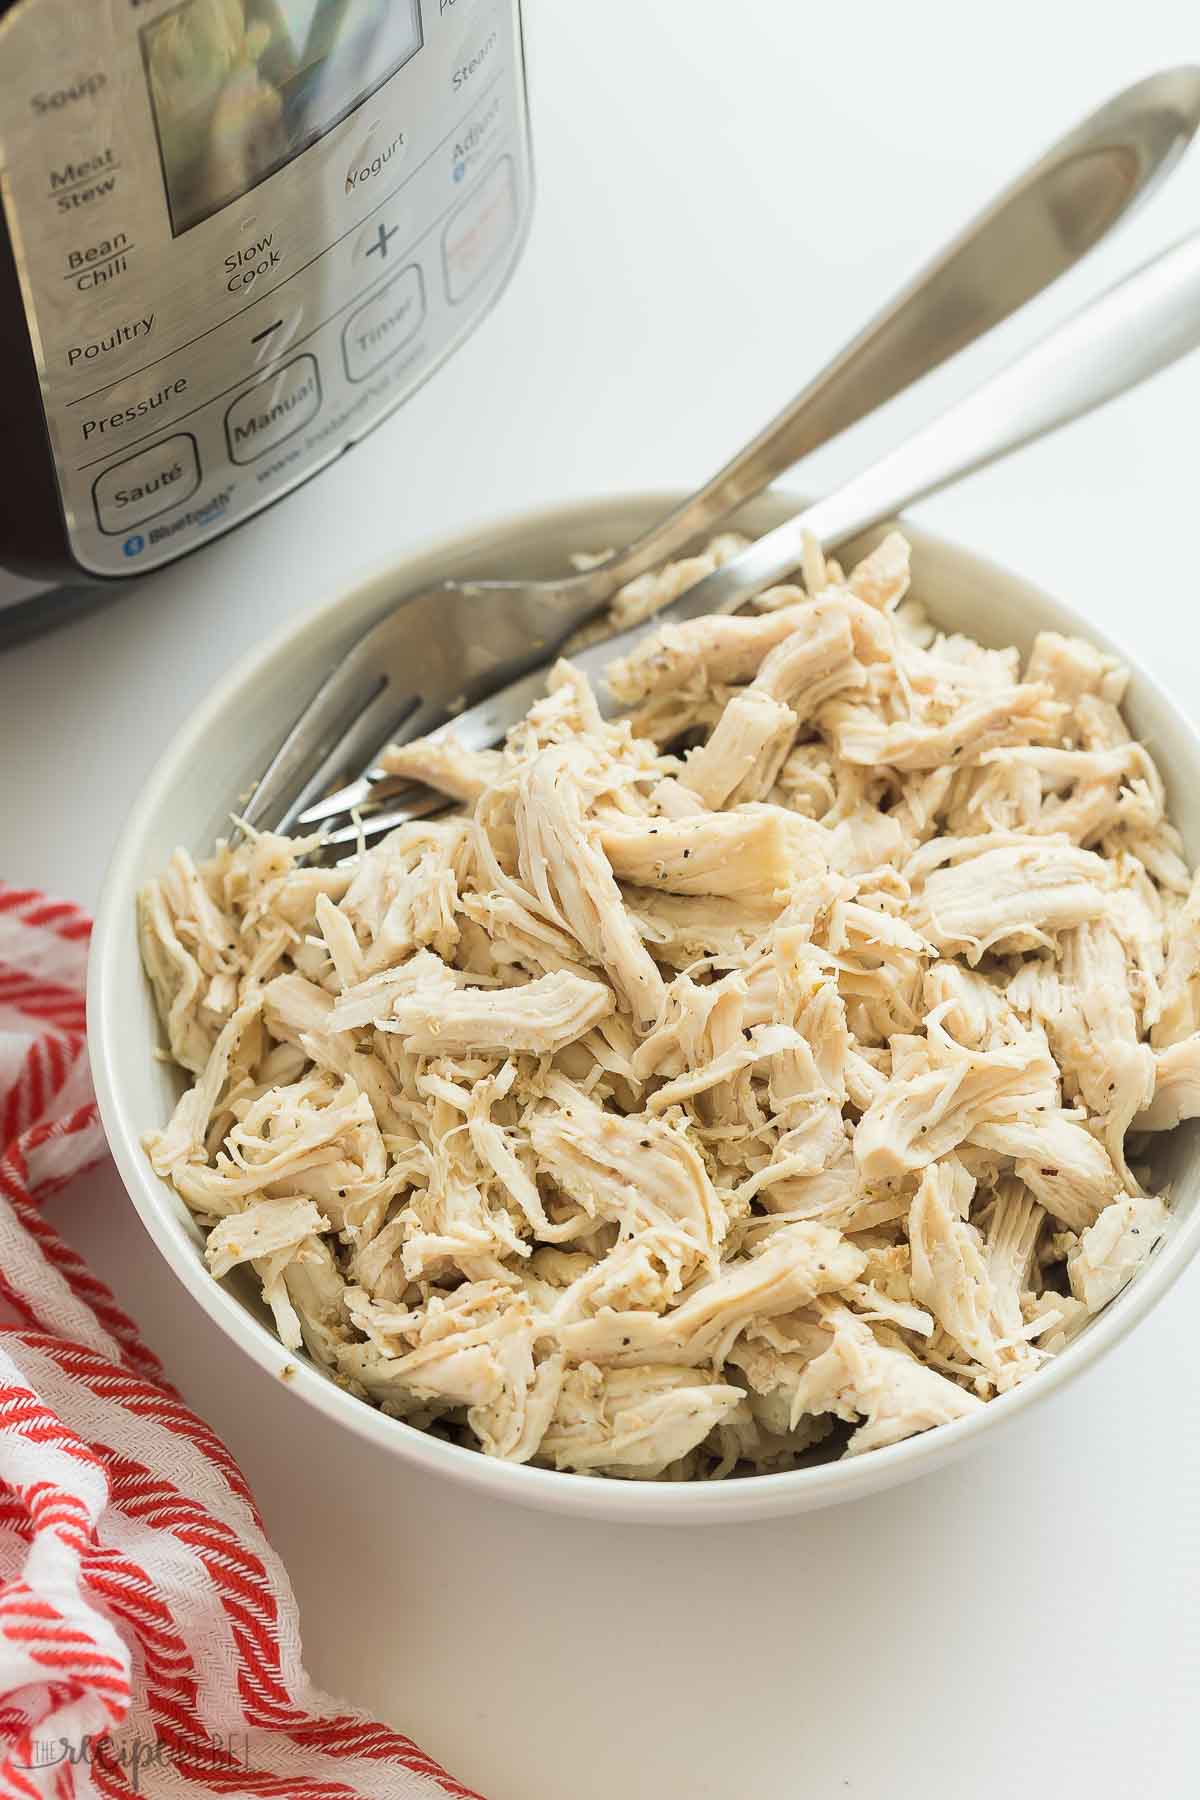 instant pot shredded chicken in bowl with two forks and instant pot in the background.